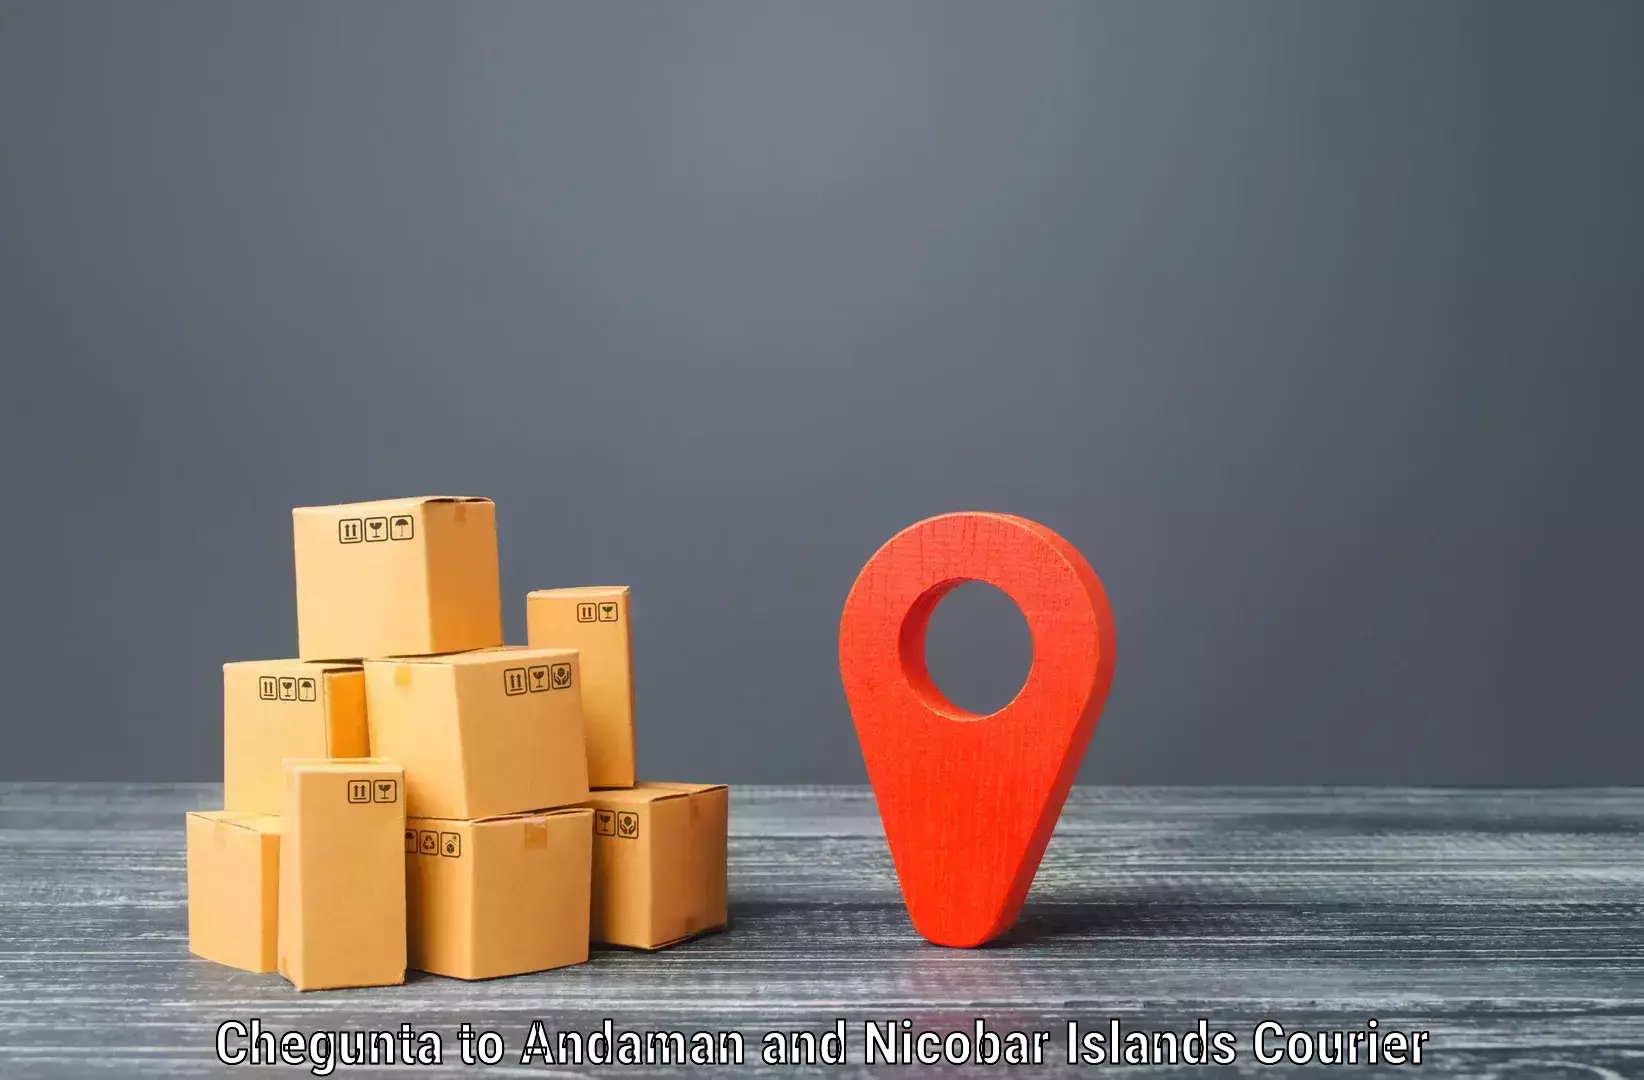 Courier app in Chegunta to Andaman and Nicobar Islands